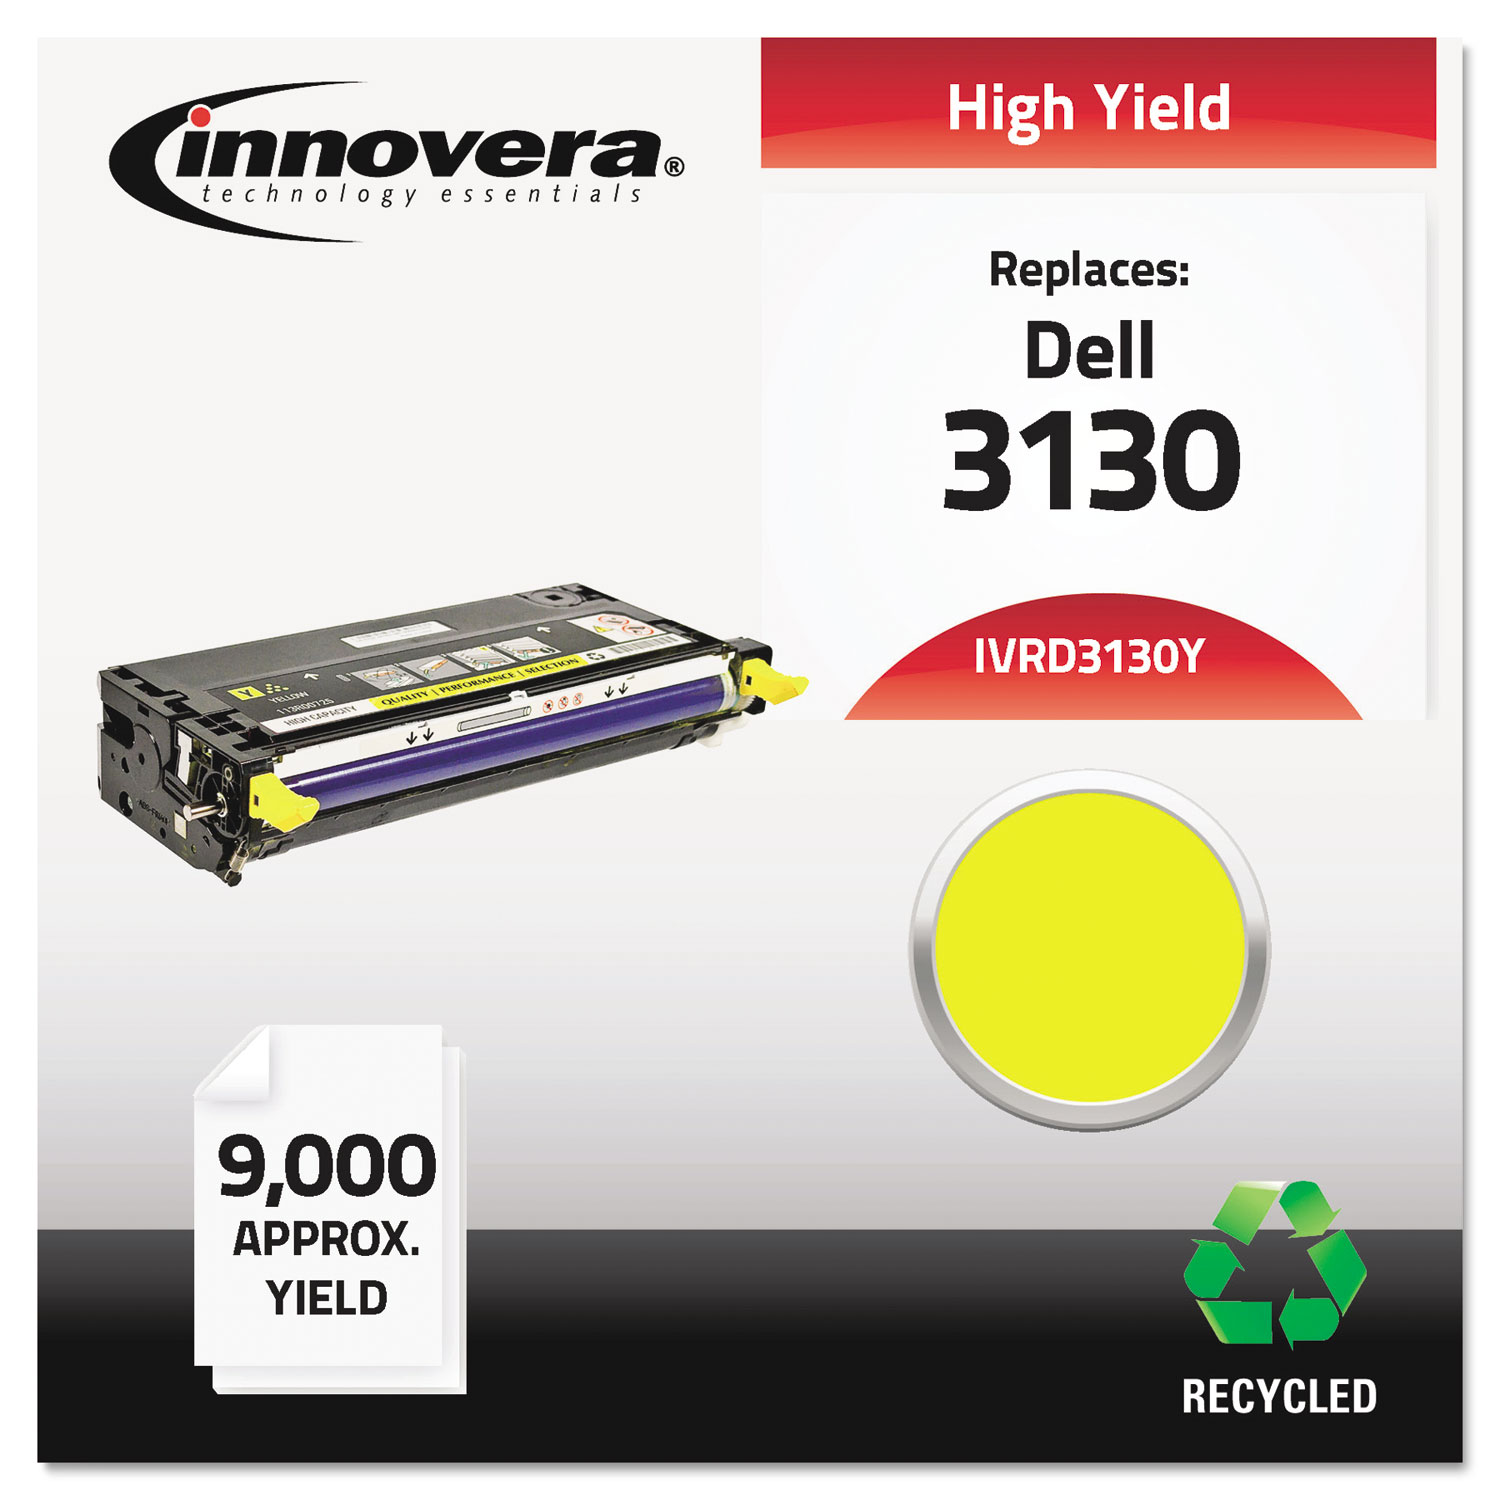 Remanufactured 330-1204 (3130) High-Yield Toner, Yellow